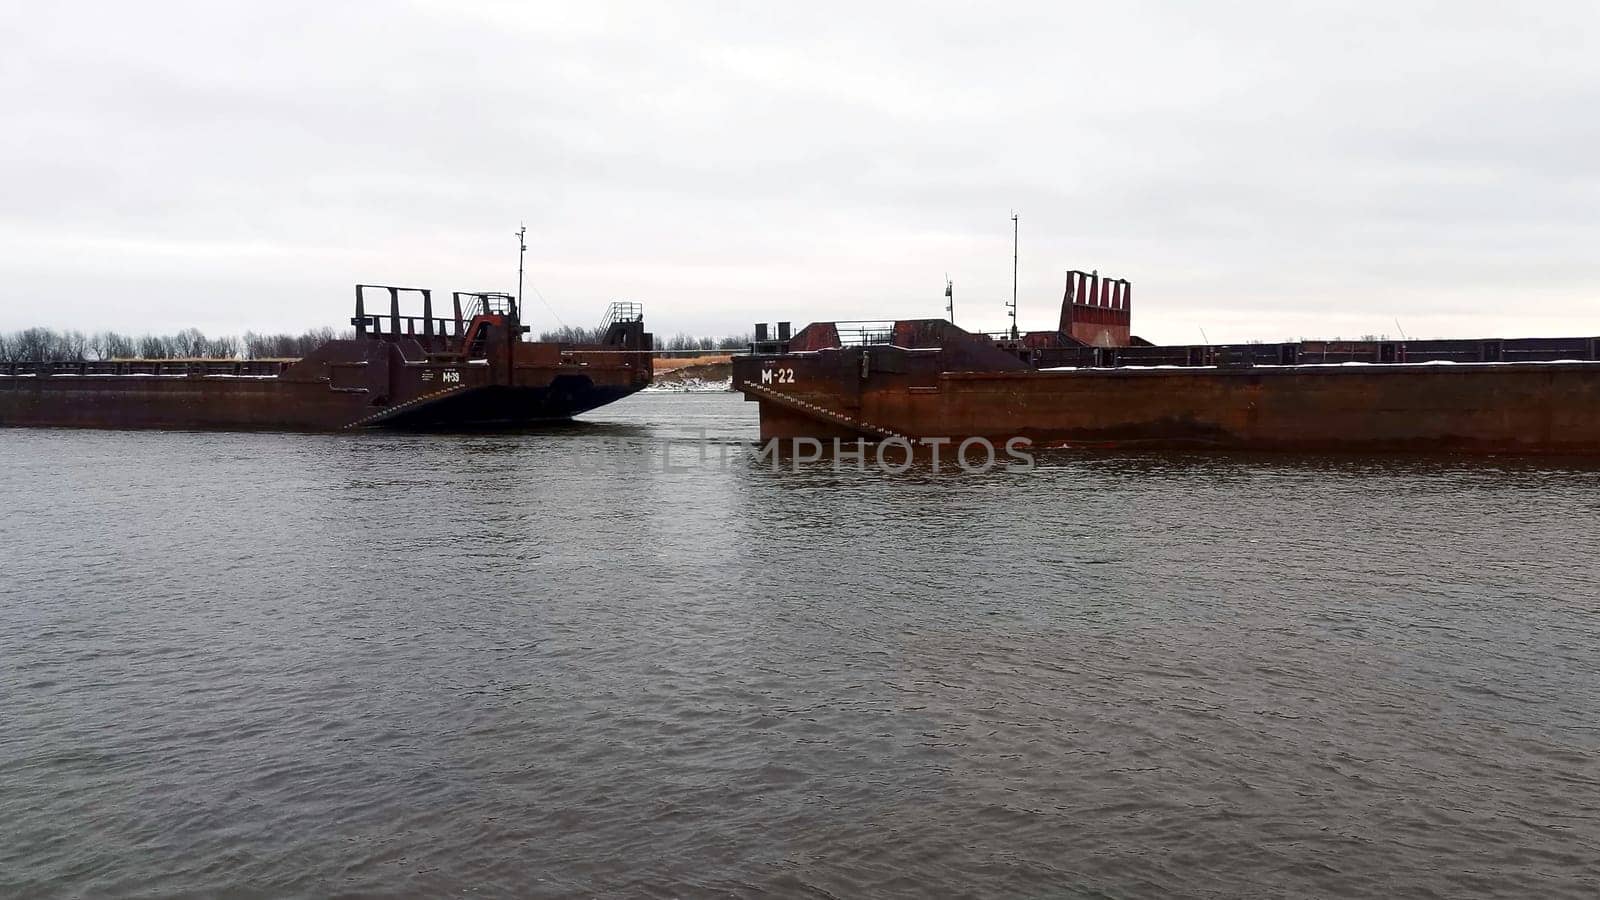 Sea transportation with barges. Clip. Floating barges for cargo transportation on river in winter. Barges on river on cloudy winter day.